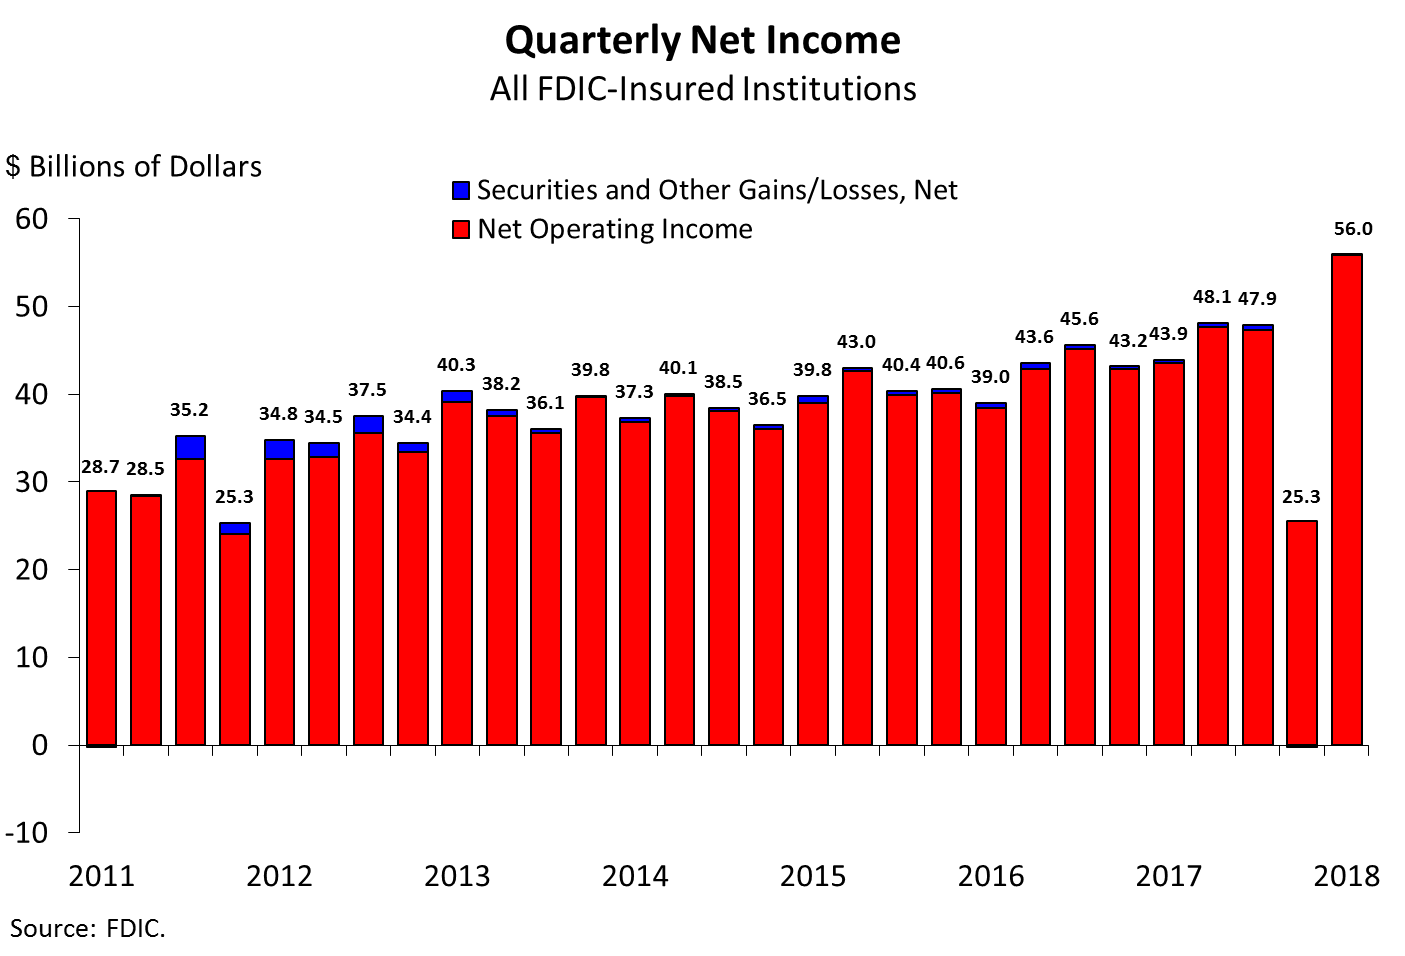 Chart 1: Quarterly Net Income, All FDIC-Insured Institutions